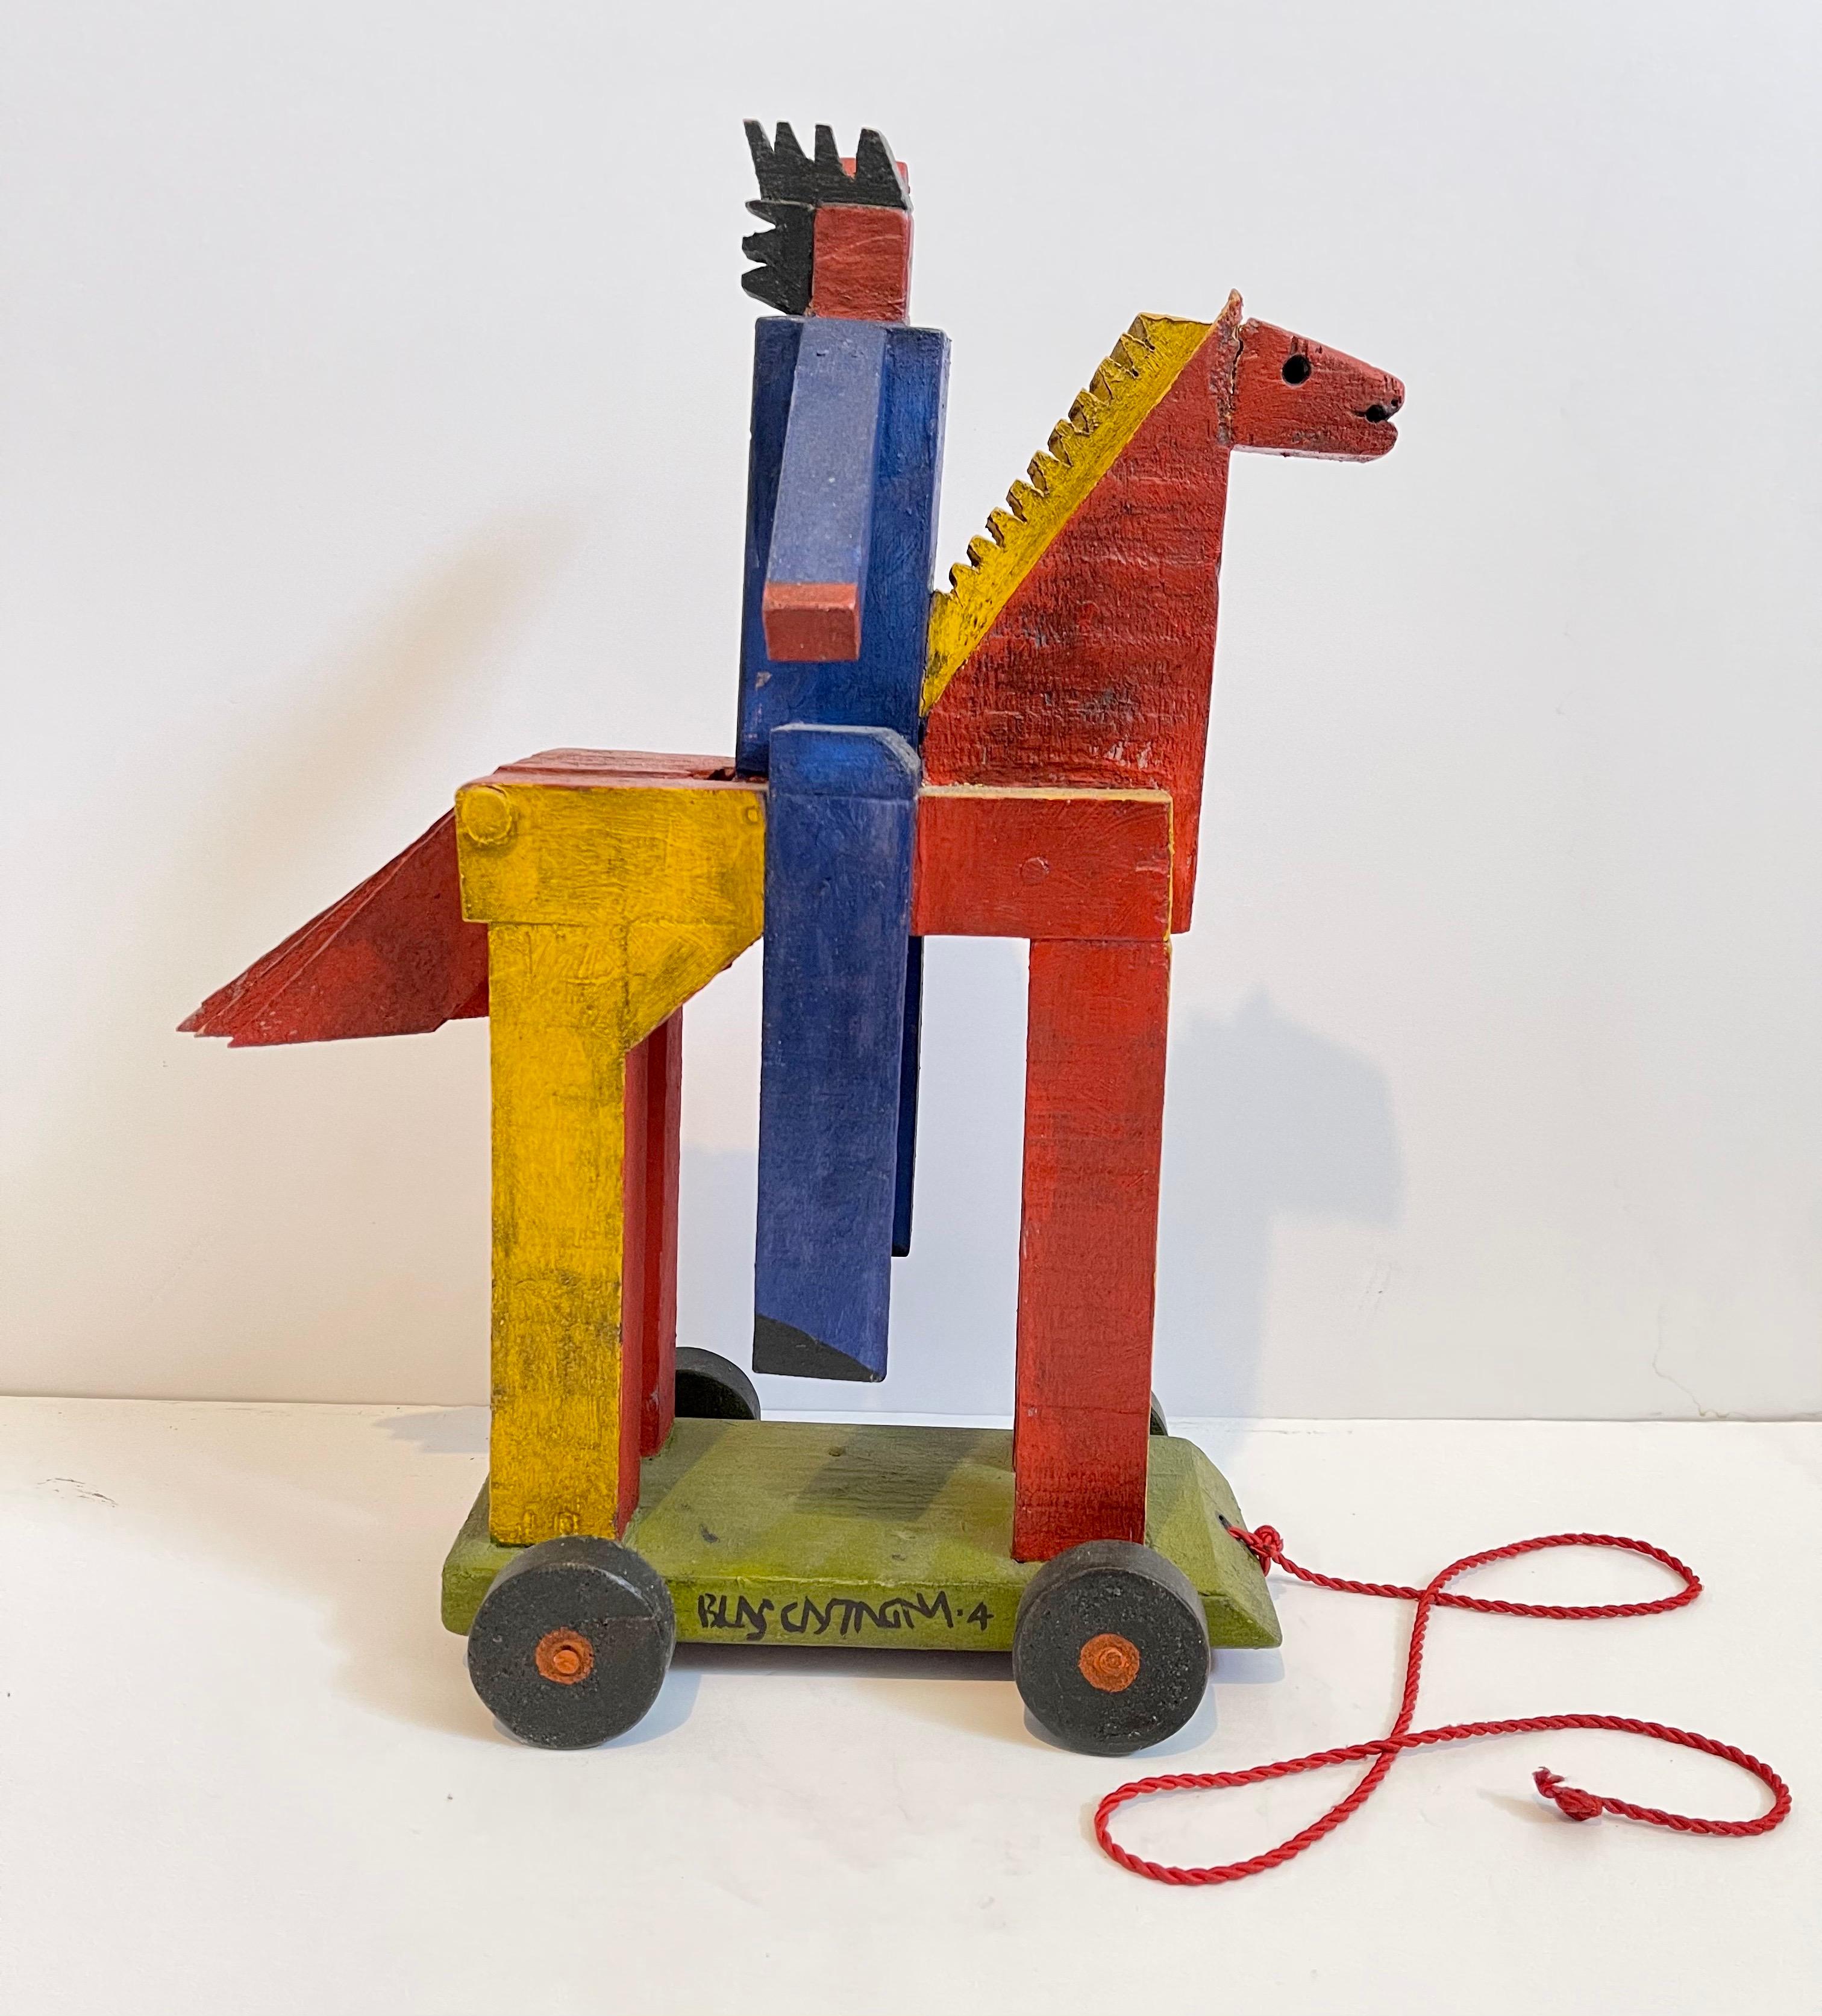 Blas Castagna Hand Painted Wooden Constructivist Sculpture Toy Horse Carved Wood For Sale 6